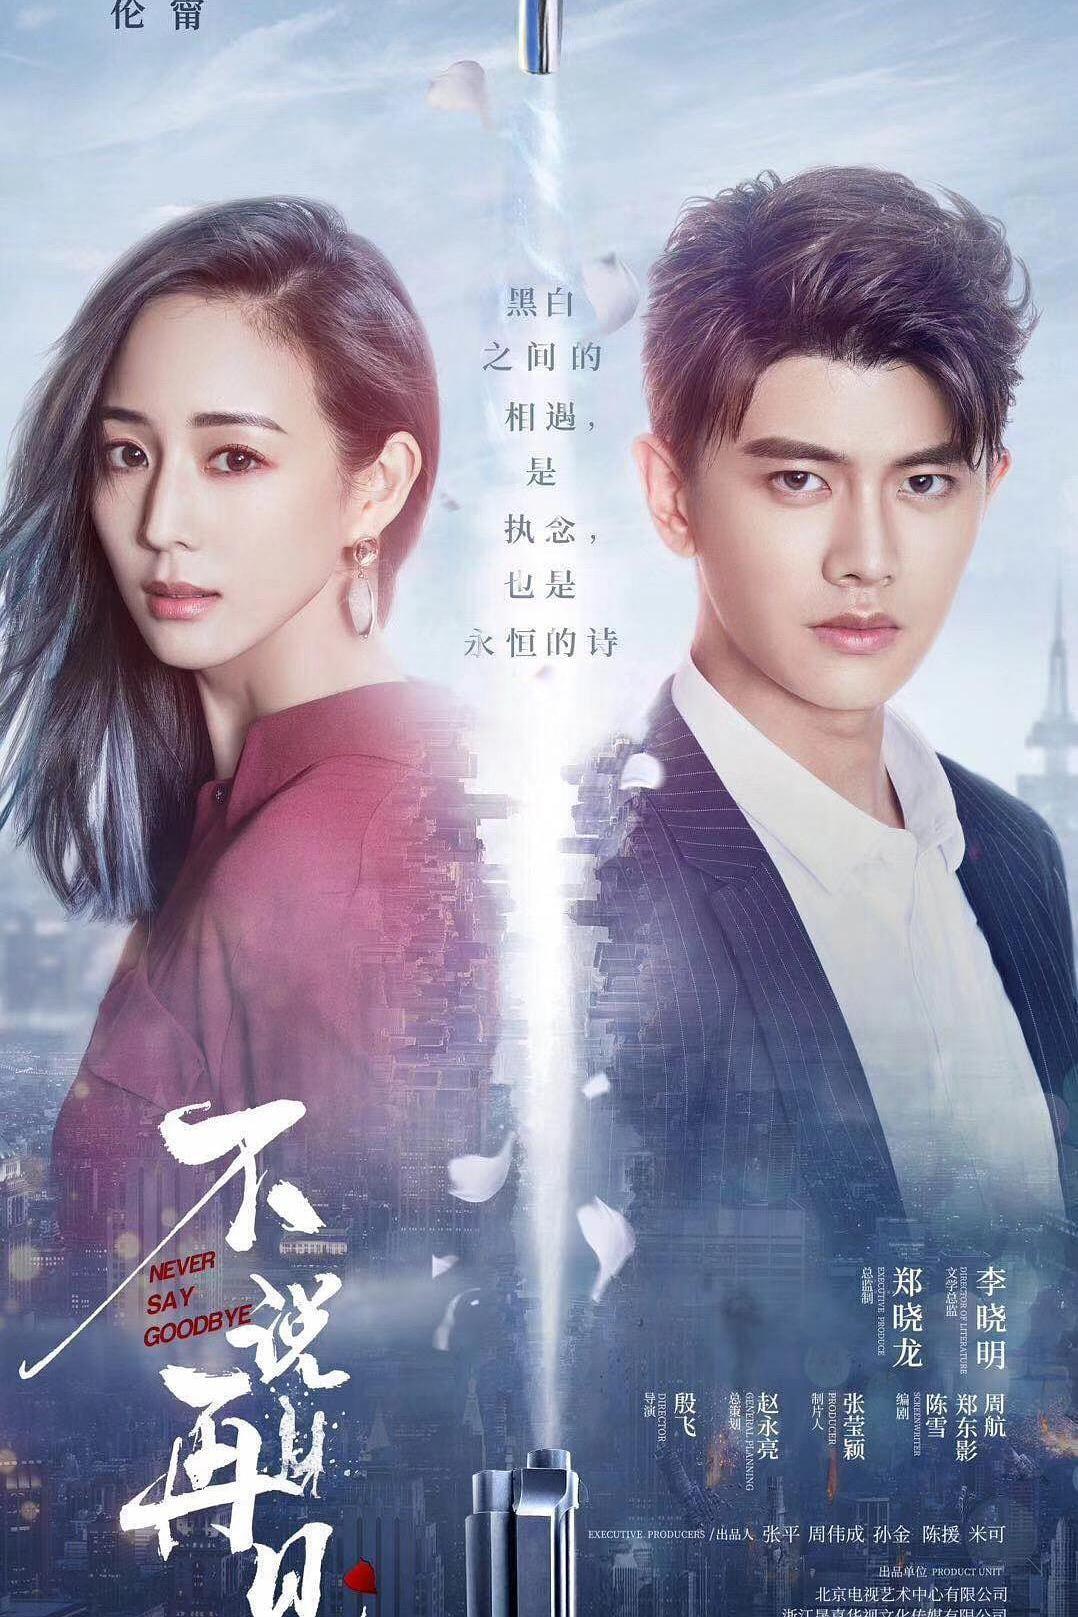 TV ratings for Never Say Goodbye (不说再见) in Sweden. iqiyi TV series